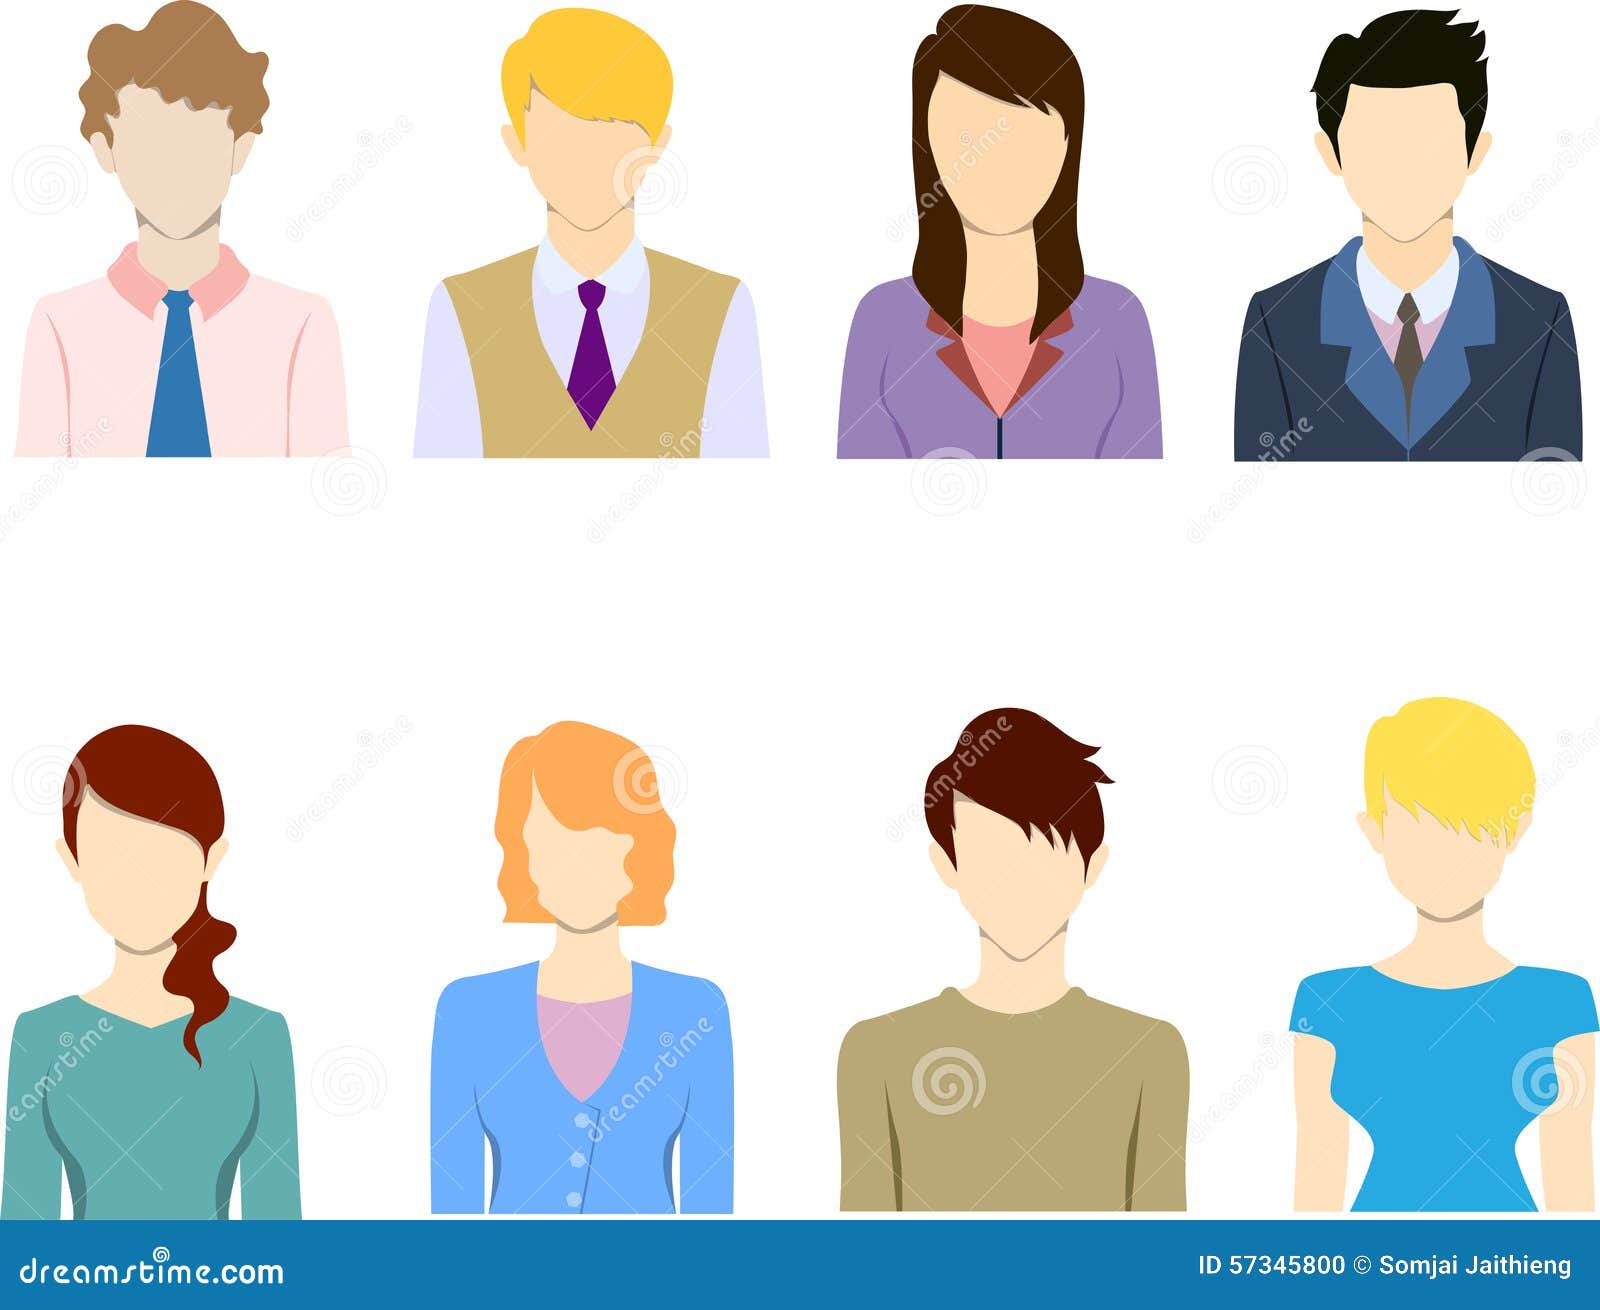 Flat Business People Icon Flat Icon Avatar Stock Illustrations 40 050 Flat Business People Icon Flat Icon Avatar Stock Illustrations Vectors Clipart Dreamstime